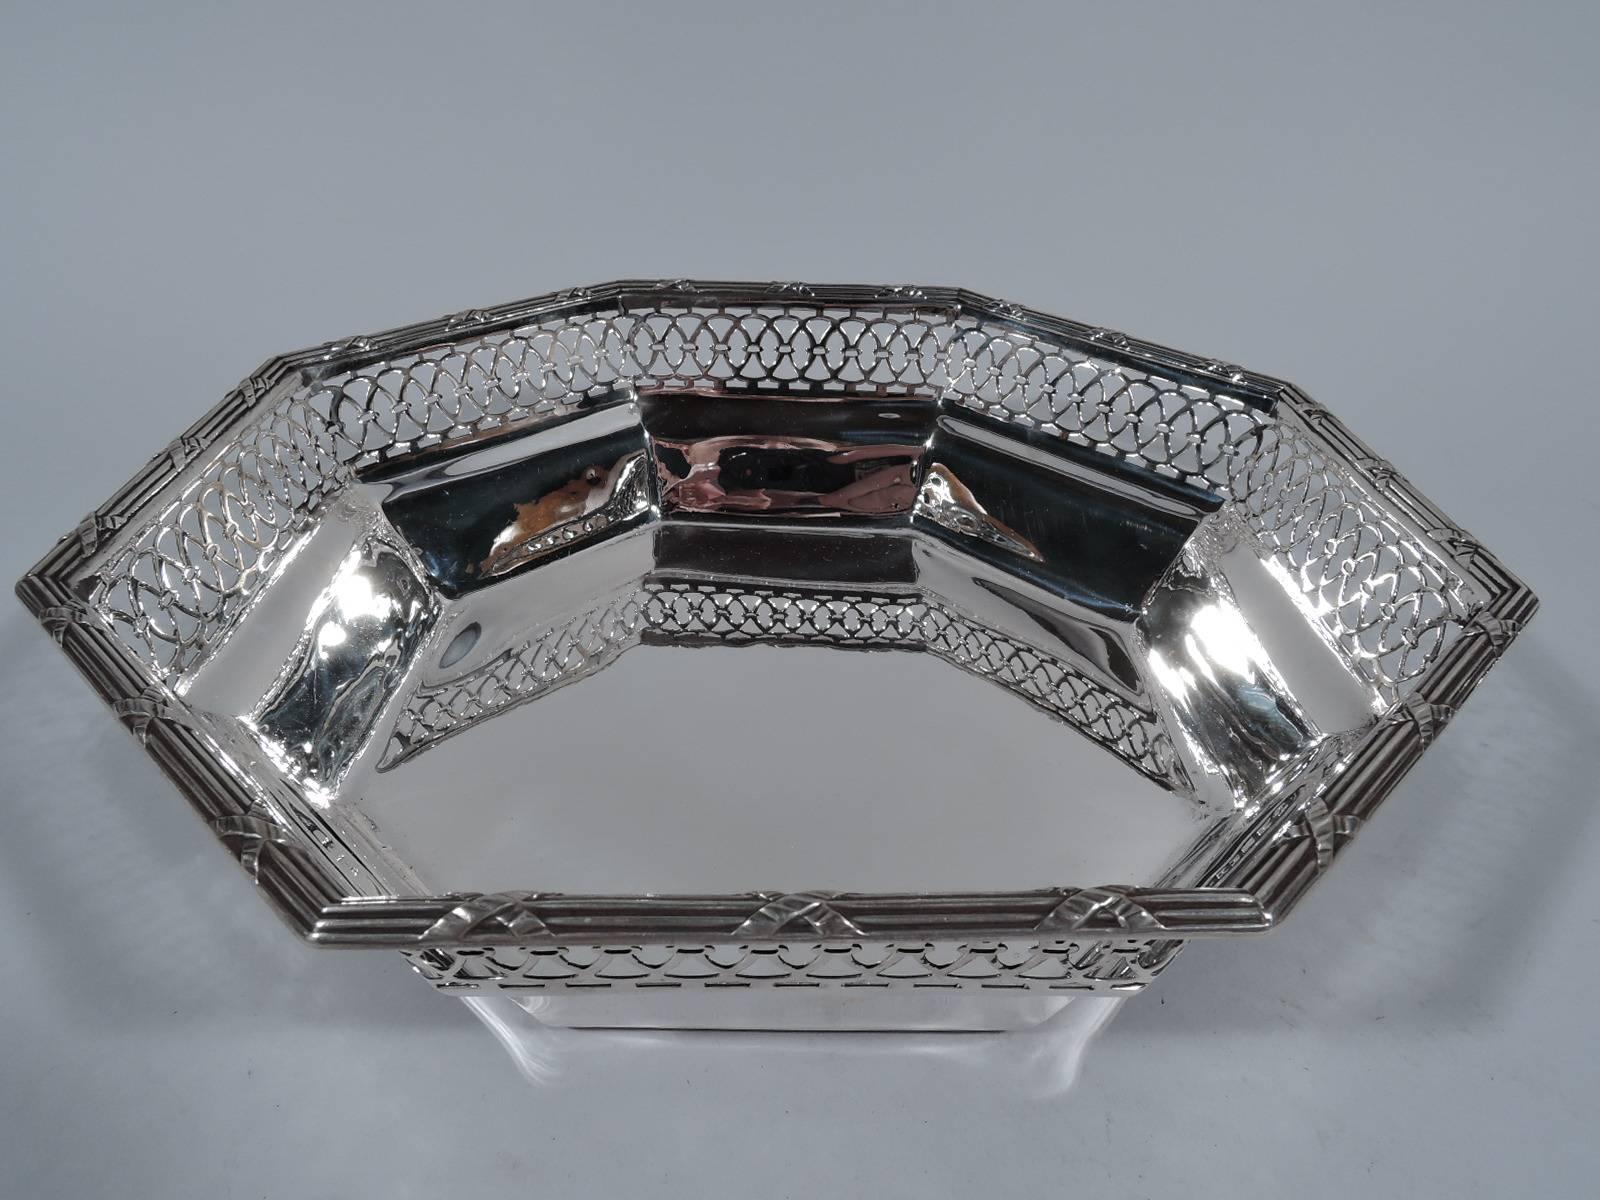 Edwardian sterling silver bowl. Retailed by Tiffany & Co. in New York, circa 1910. Solid octagonal well and tapering sides. Top sides have pierced and interlaced ornament. Reeded rim. Hallmark includes no. 881. Weight: 13 troy ounces.